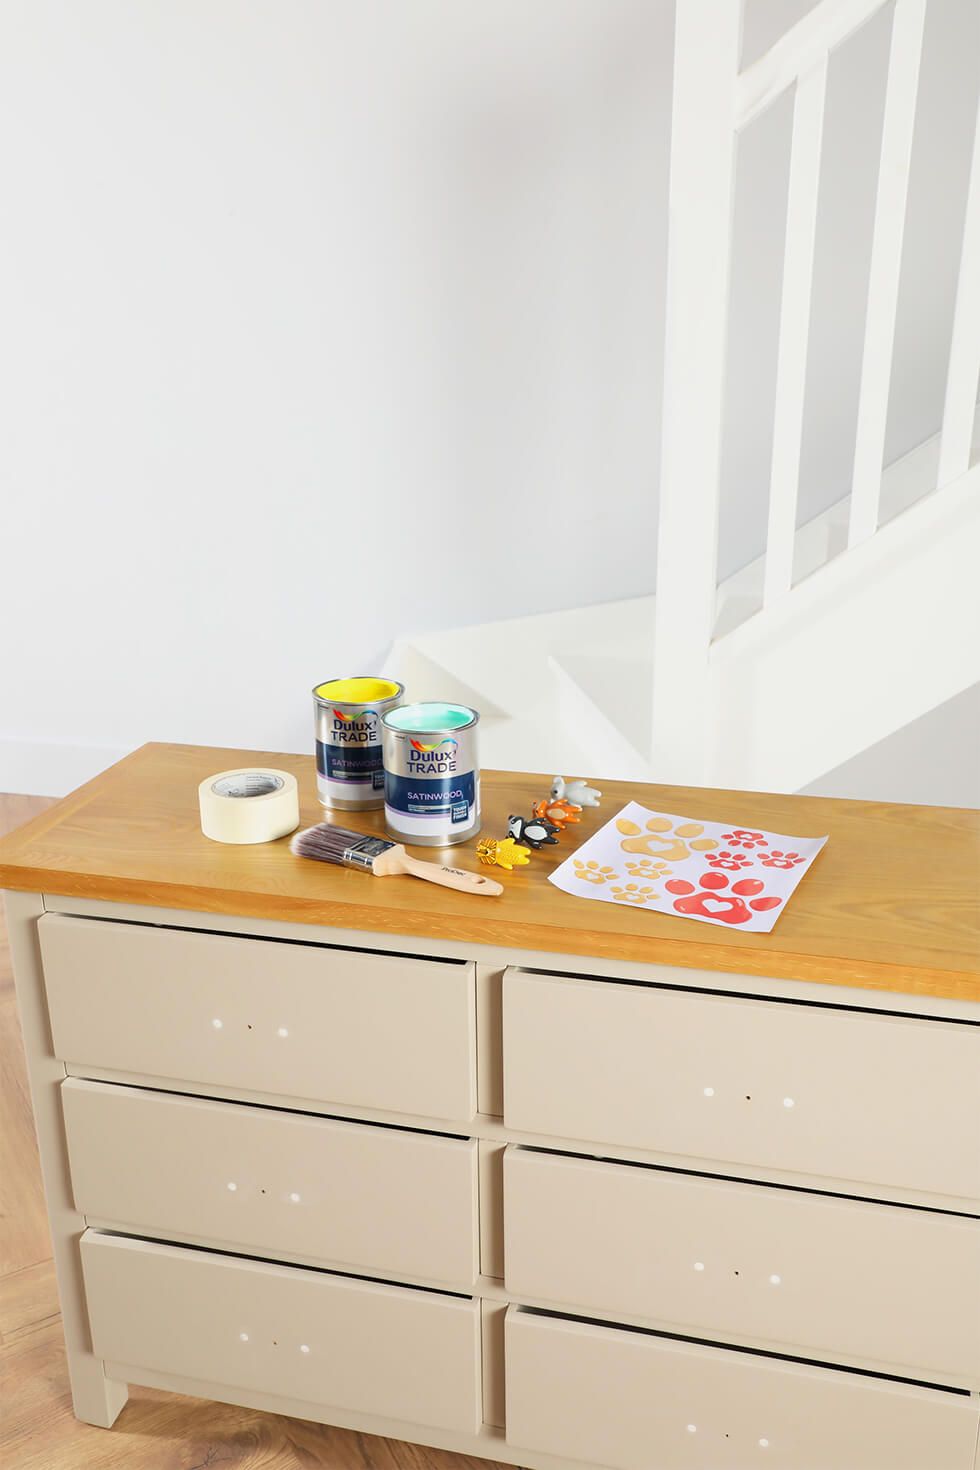 Things you need to makeover a toy storage dresser